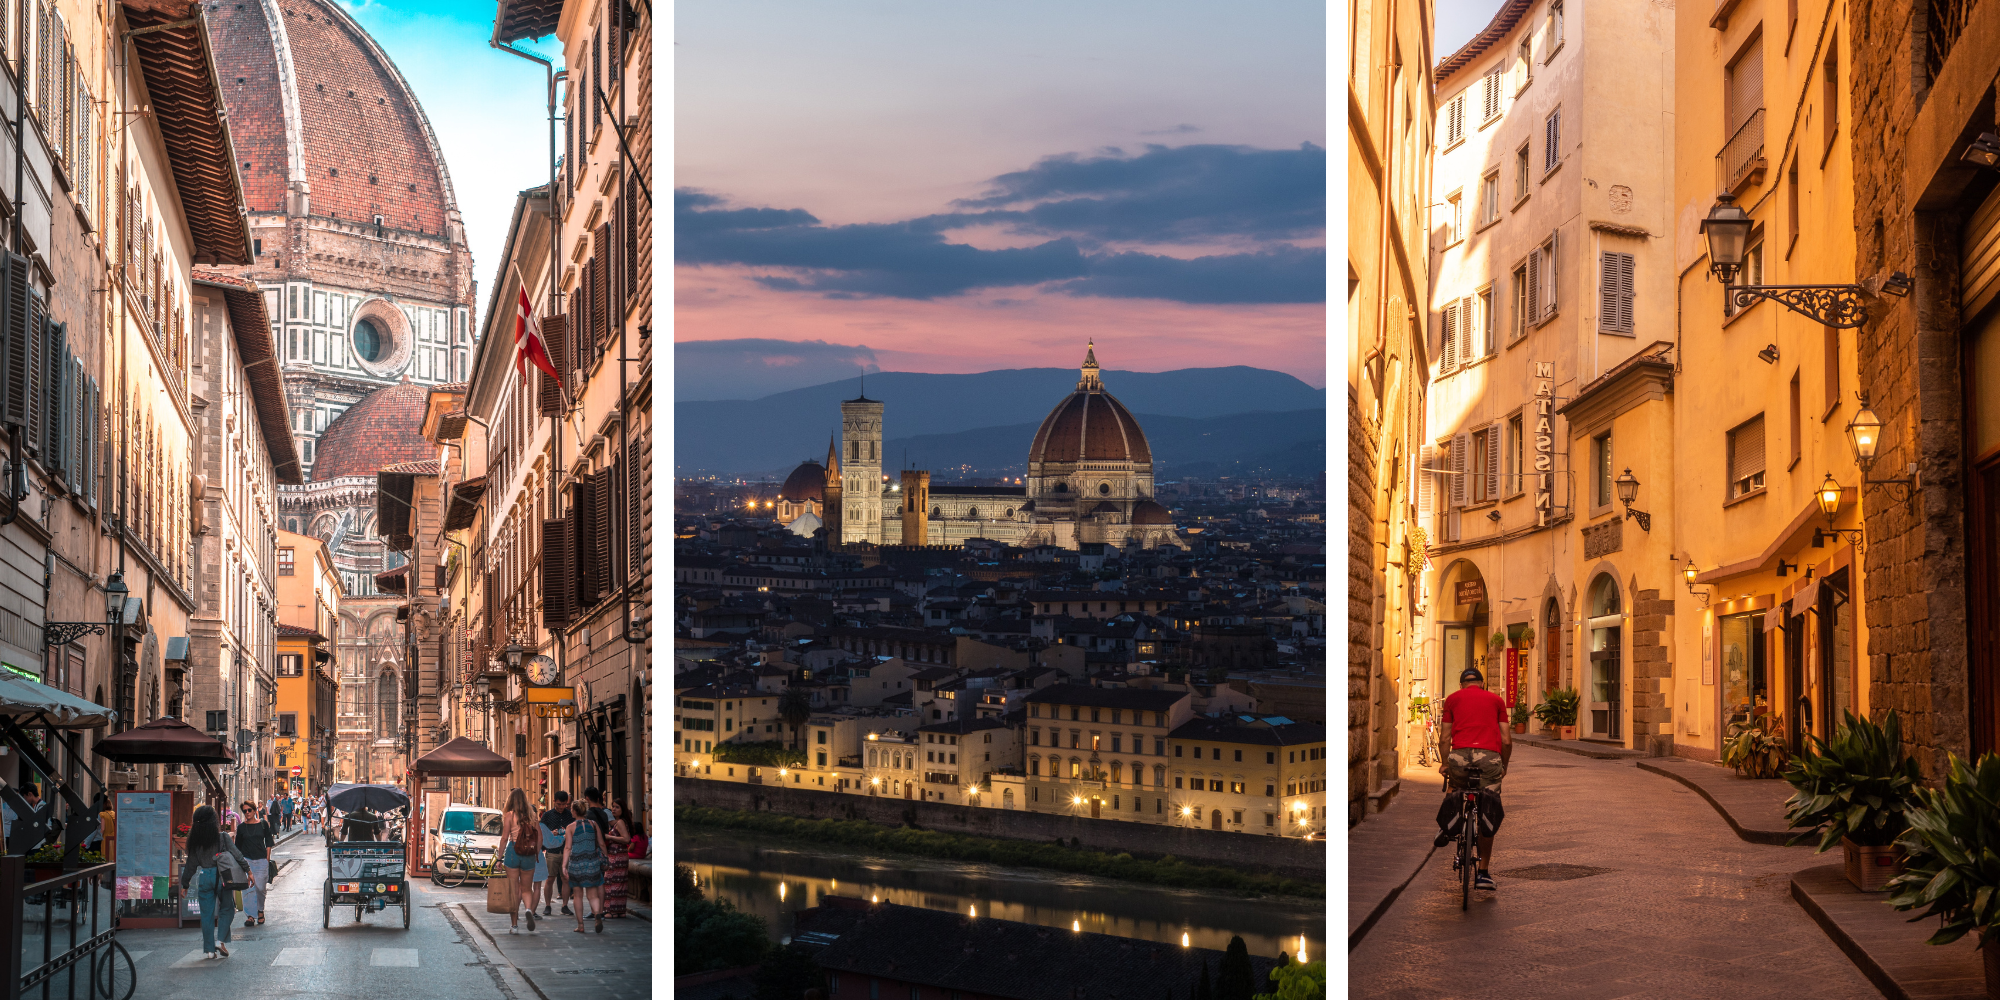 Beautiful sites you'll see when you study abroad in Florence, Italy.